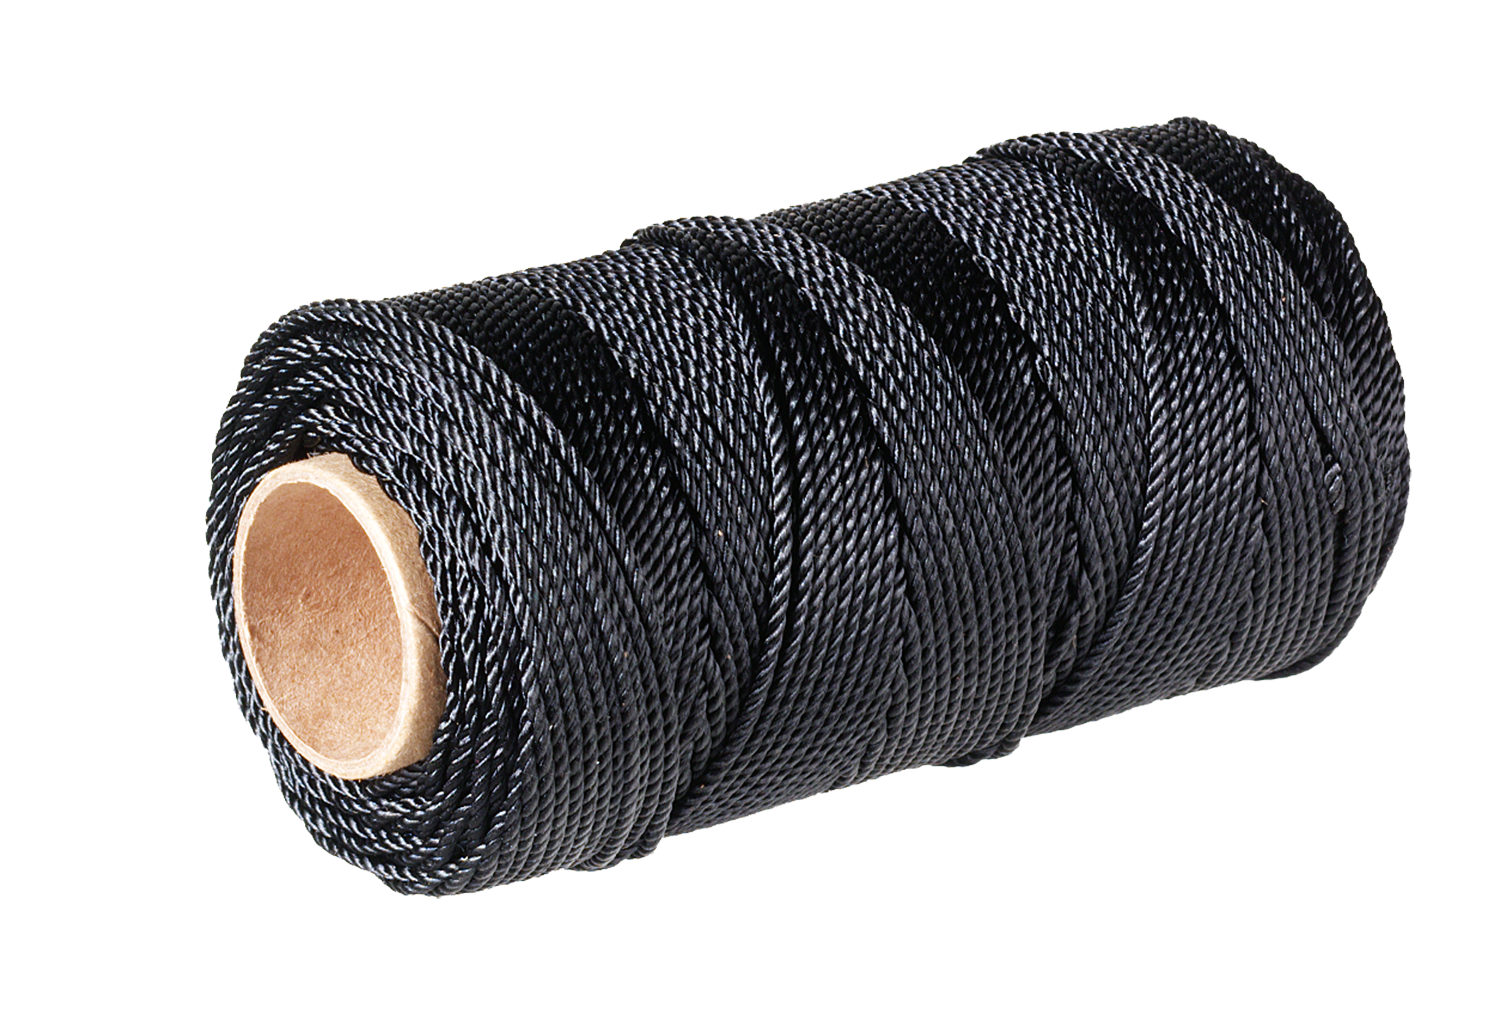 Tarred Bank Line Cordage - Black Nylon Twine for Fishing, Camping,  Backpacking, Survival & Bushcraft Gear – Heavy Duty Bankline for Trot &  Decoy Lines